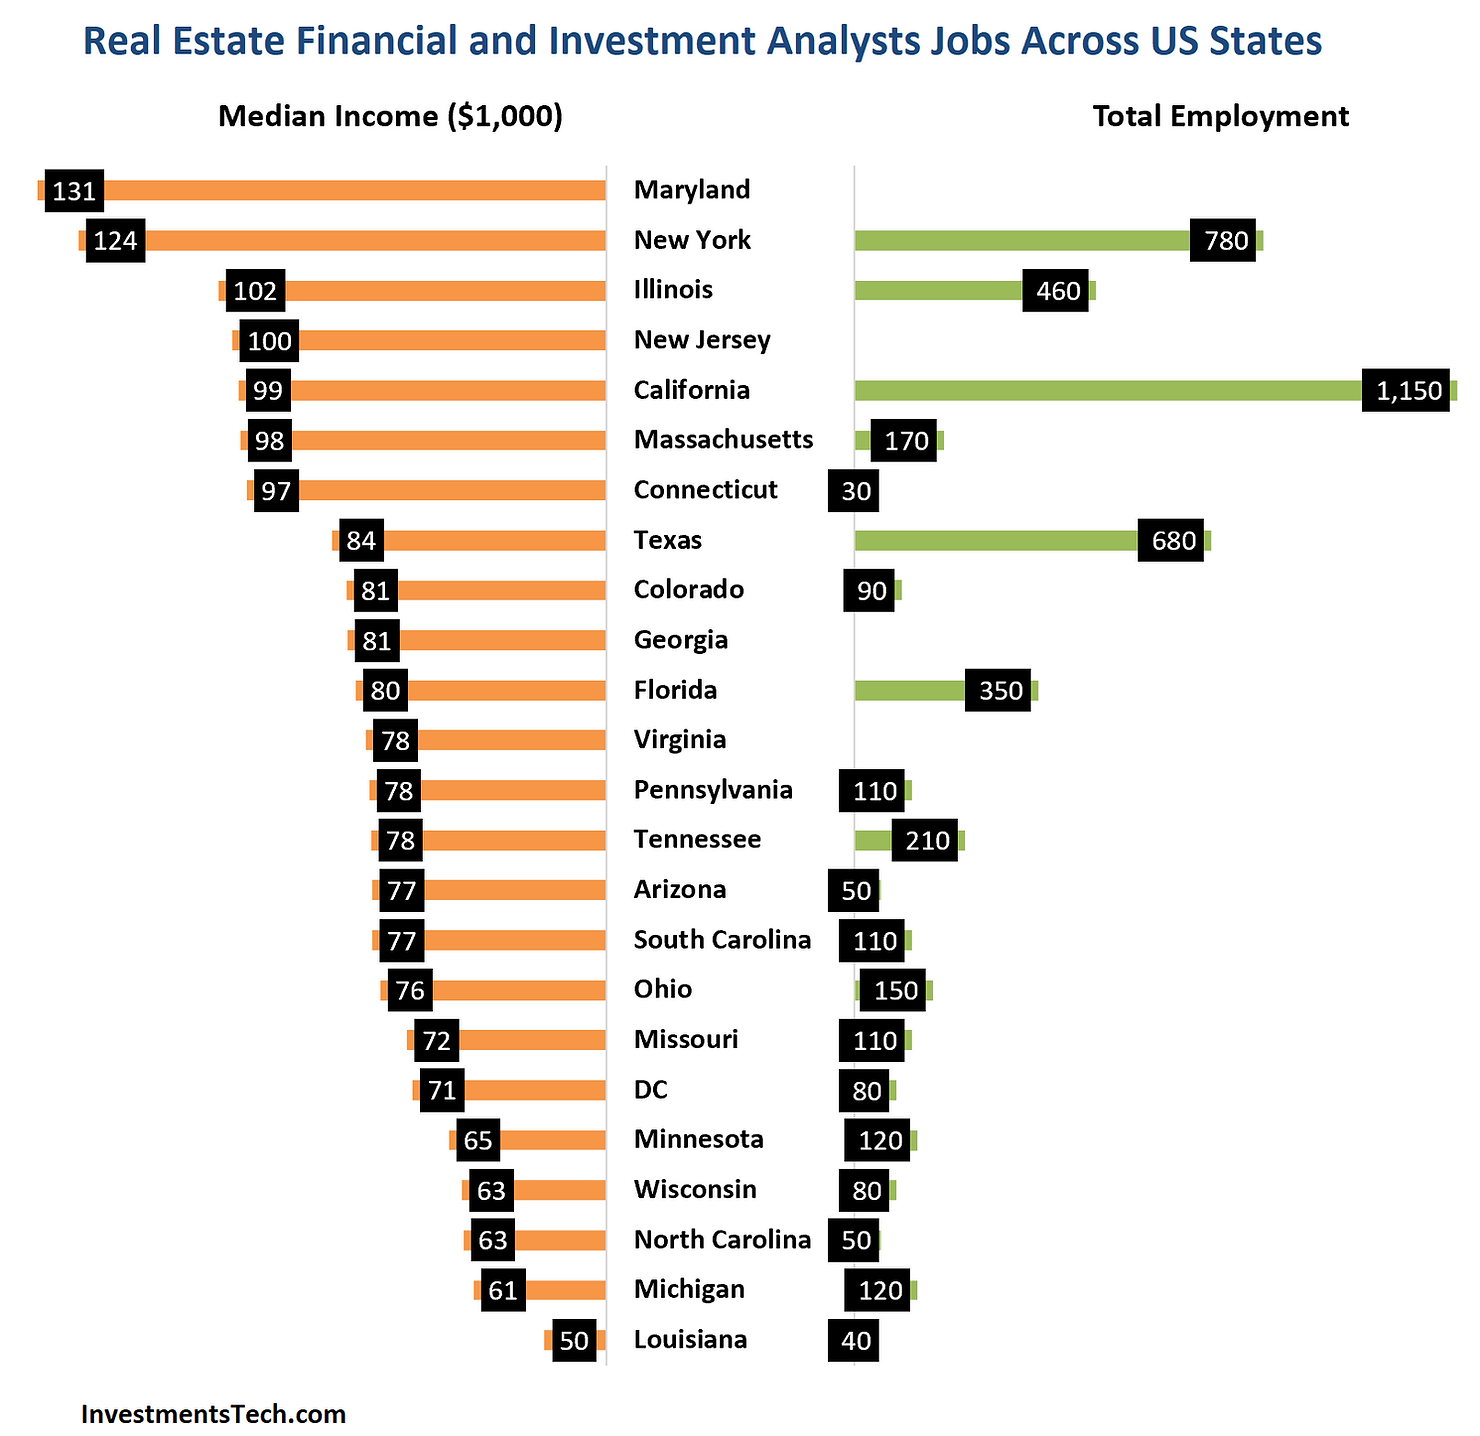 Real Estate Financial and Investment Analysts Jobs Across the US States